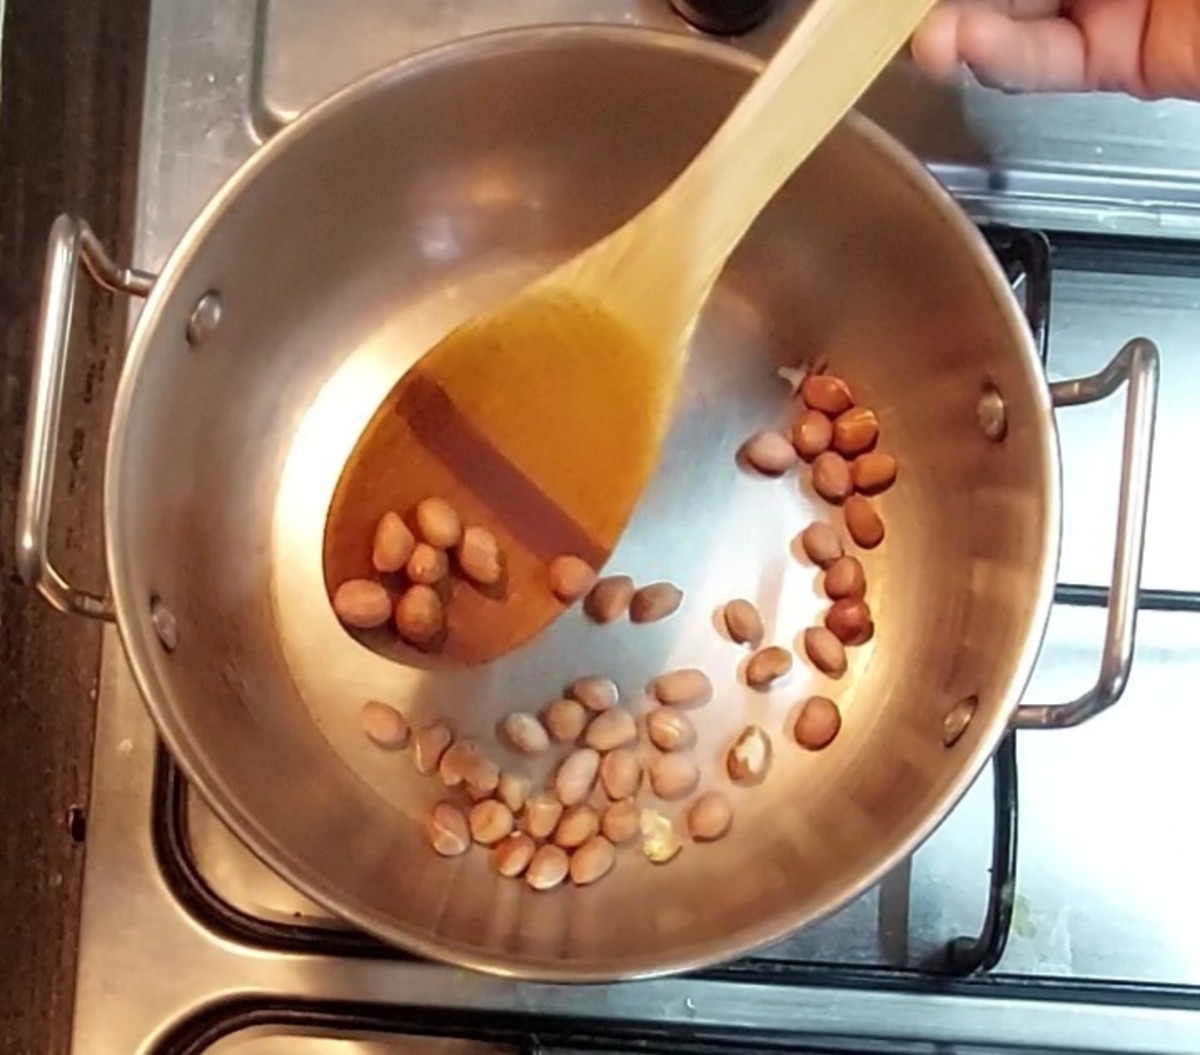 In a pan, dry-roast 2 tablespoons of peanuts till aromatic and the peels start to separate. Once done, transfer to a plate.